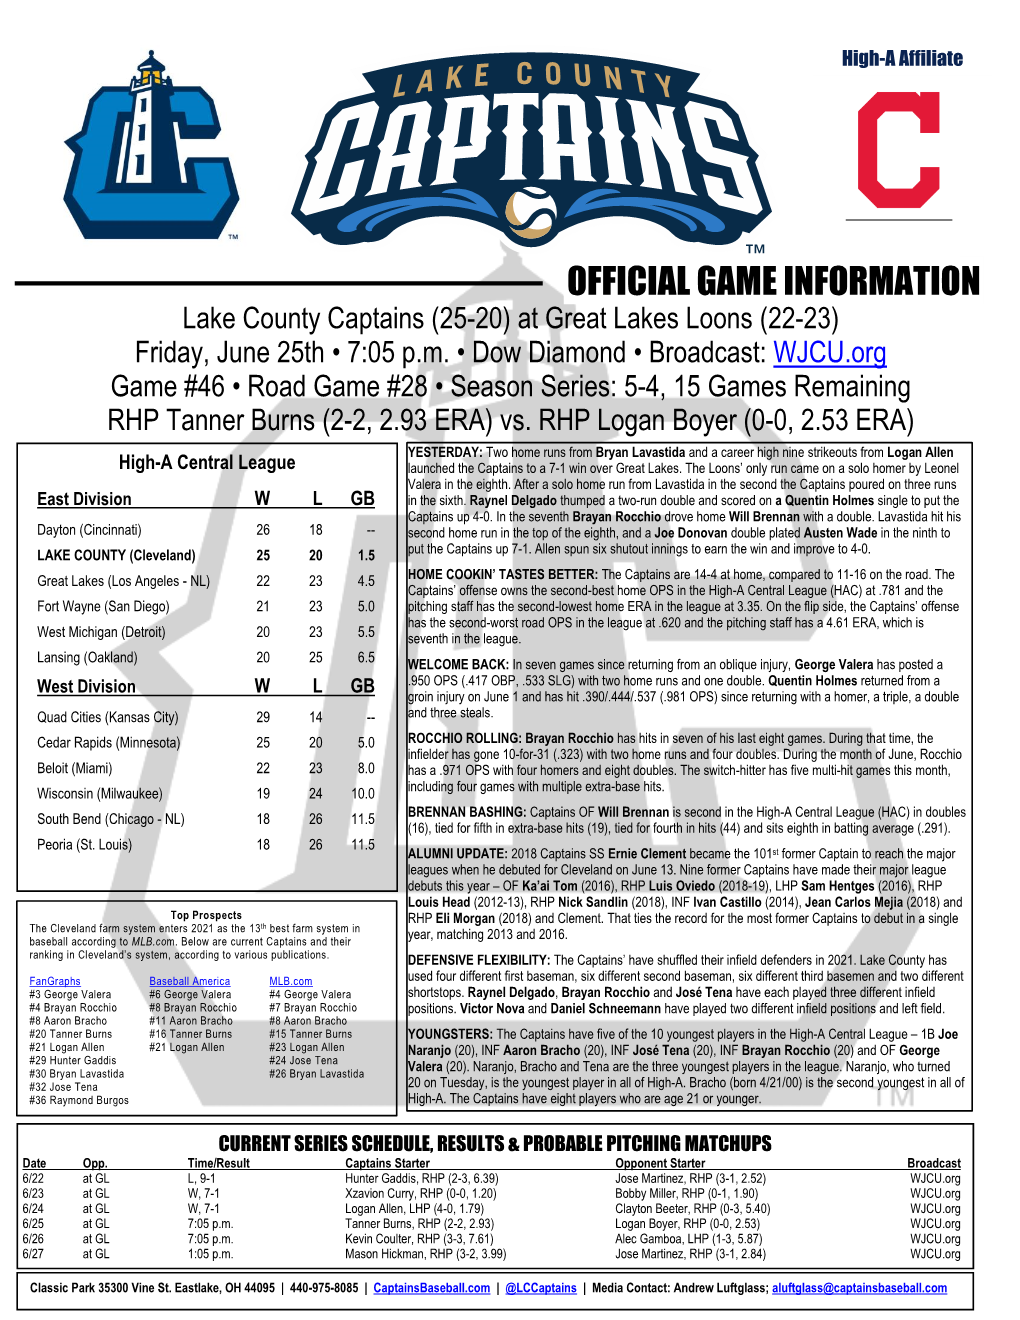 OFFICIAL GAME INFORMATION Lake County Captains (25-20) at Great Lakes Loons (22-23) Friday, June 25Th • 7:05 P.M